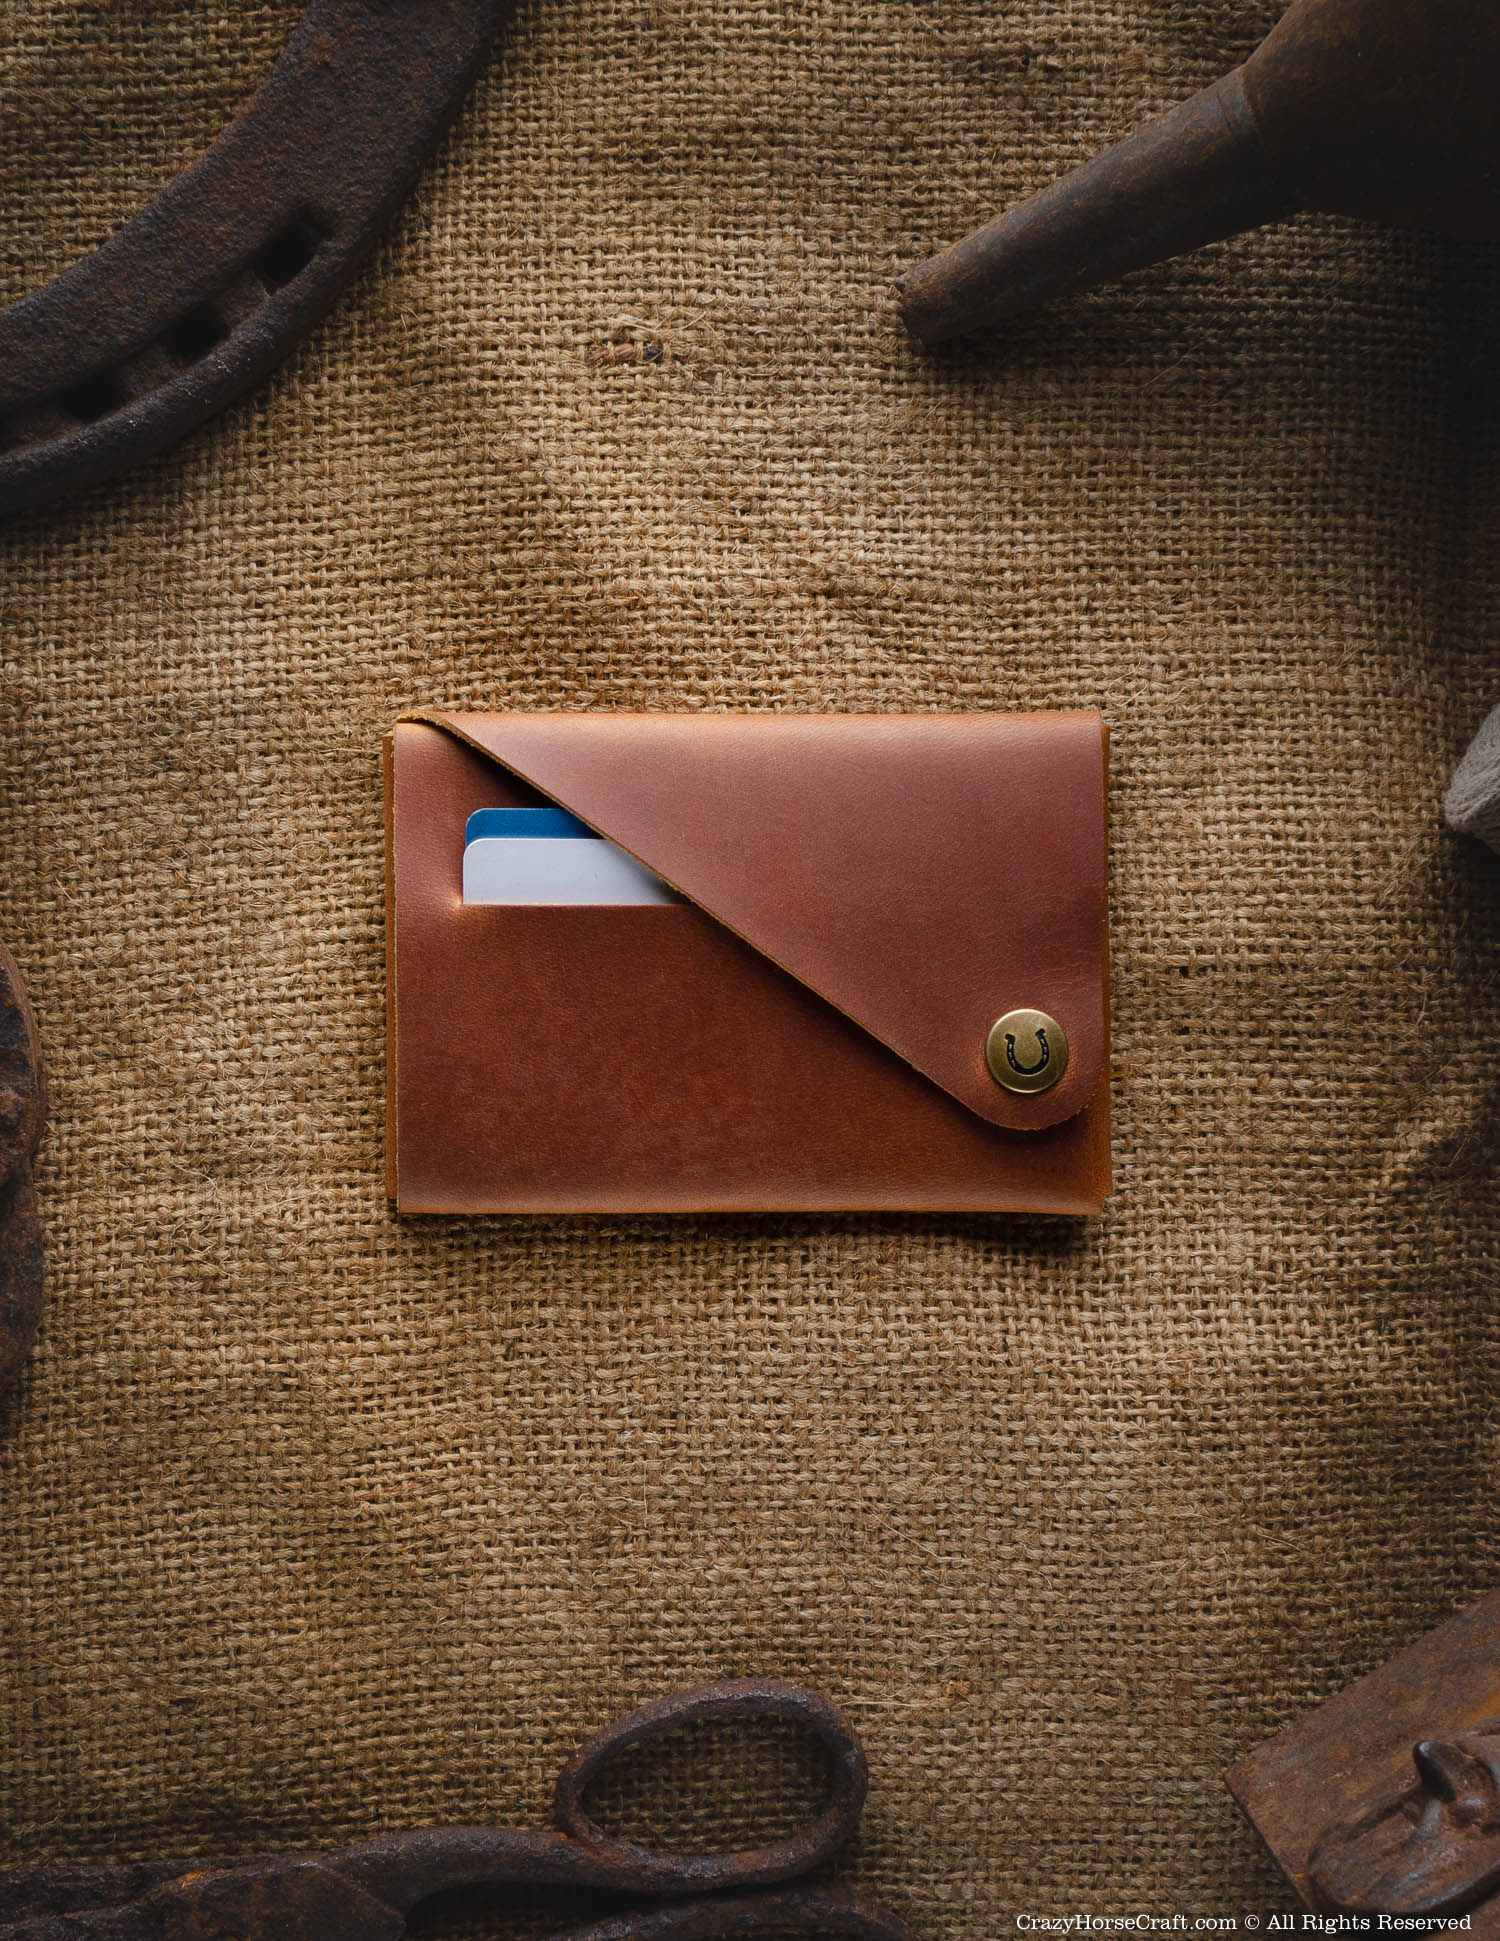 Leather wallet and credit card holder  Classic Brown handmade vintage  style cardholder minimalist slim veg-tanned Crazy Horse leather unique  personalized gift for men and woman, Crazy Horse Craft : :  Handmade